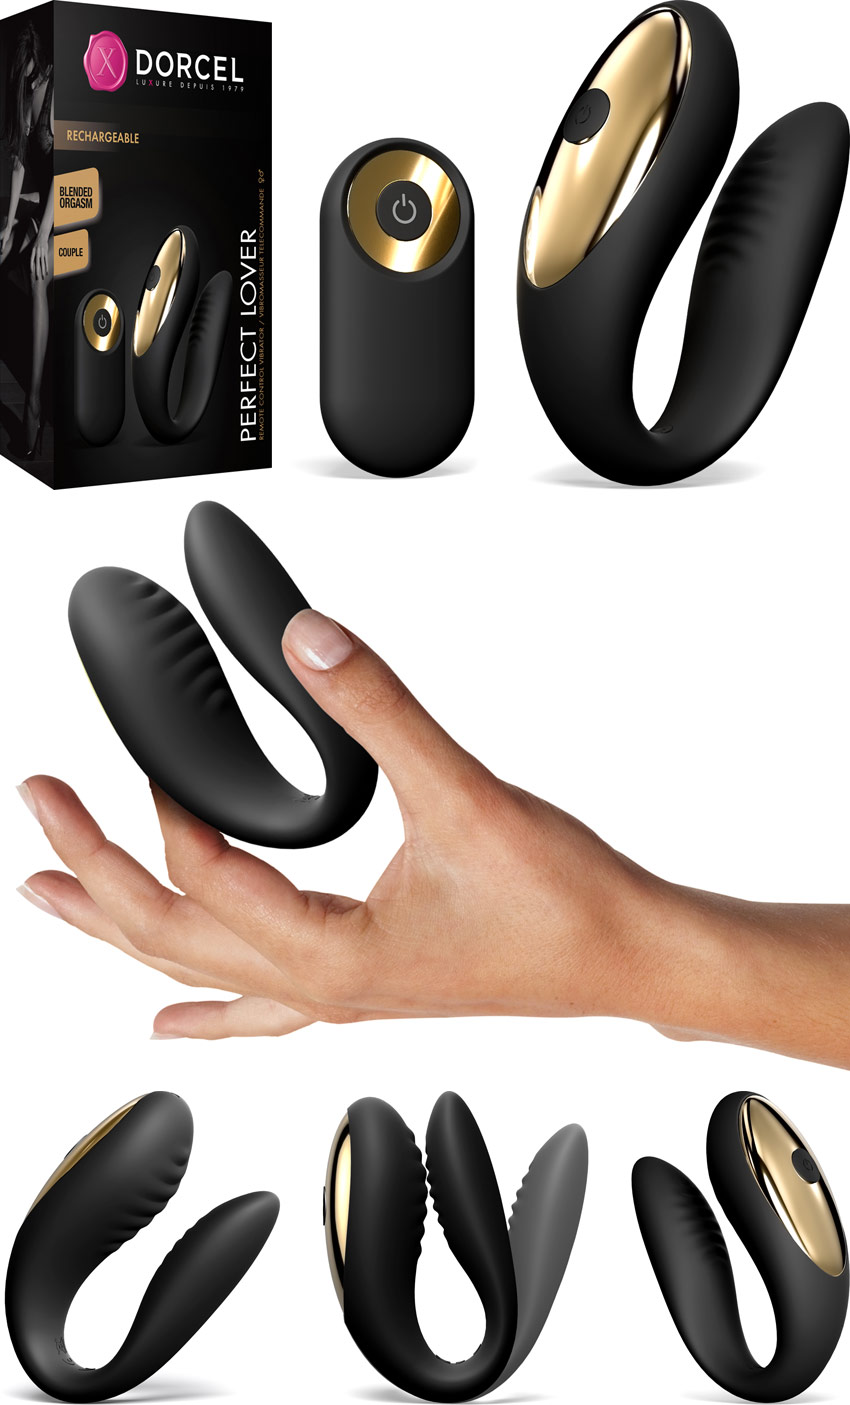 Dorcel Perfect Lover stimulator for couples